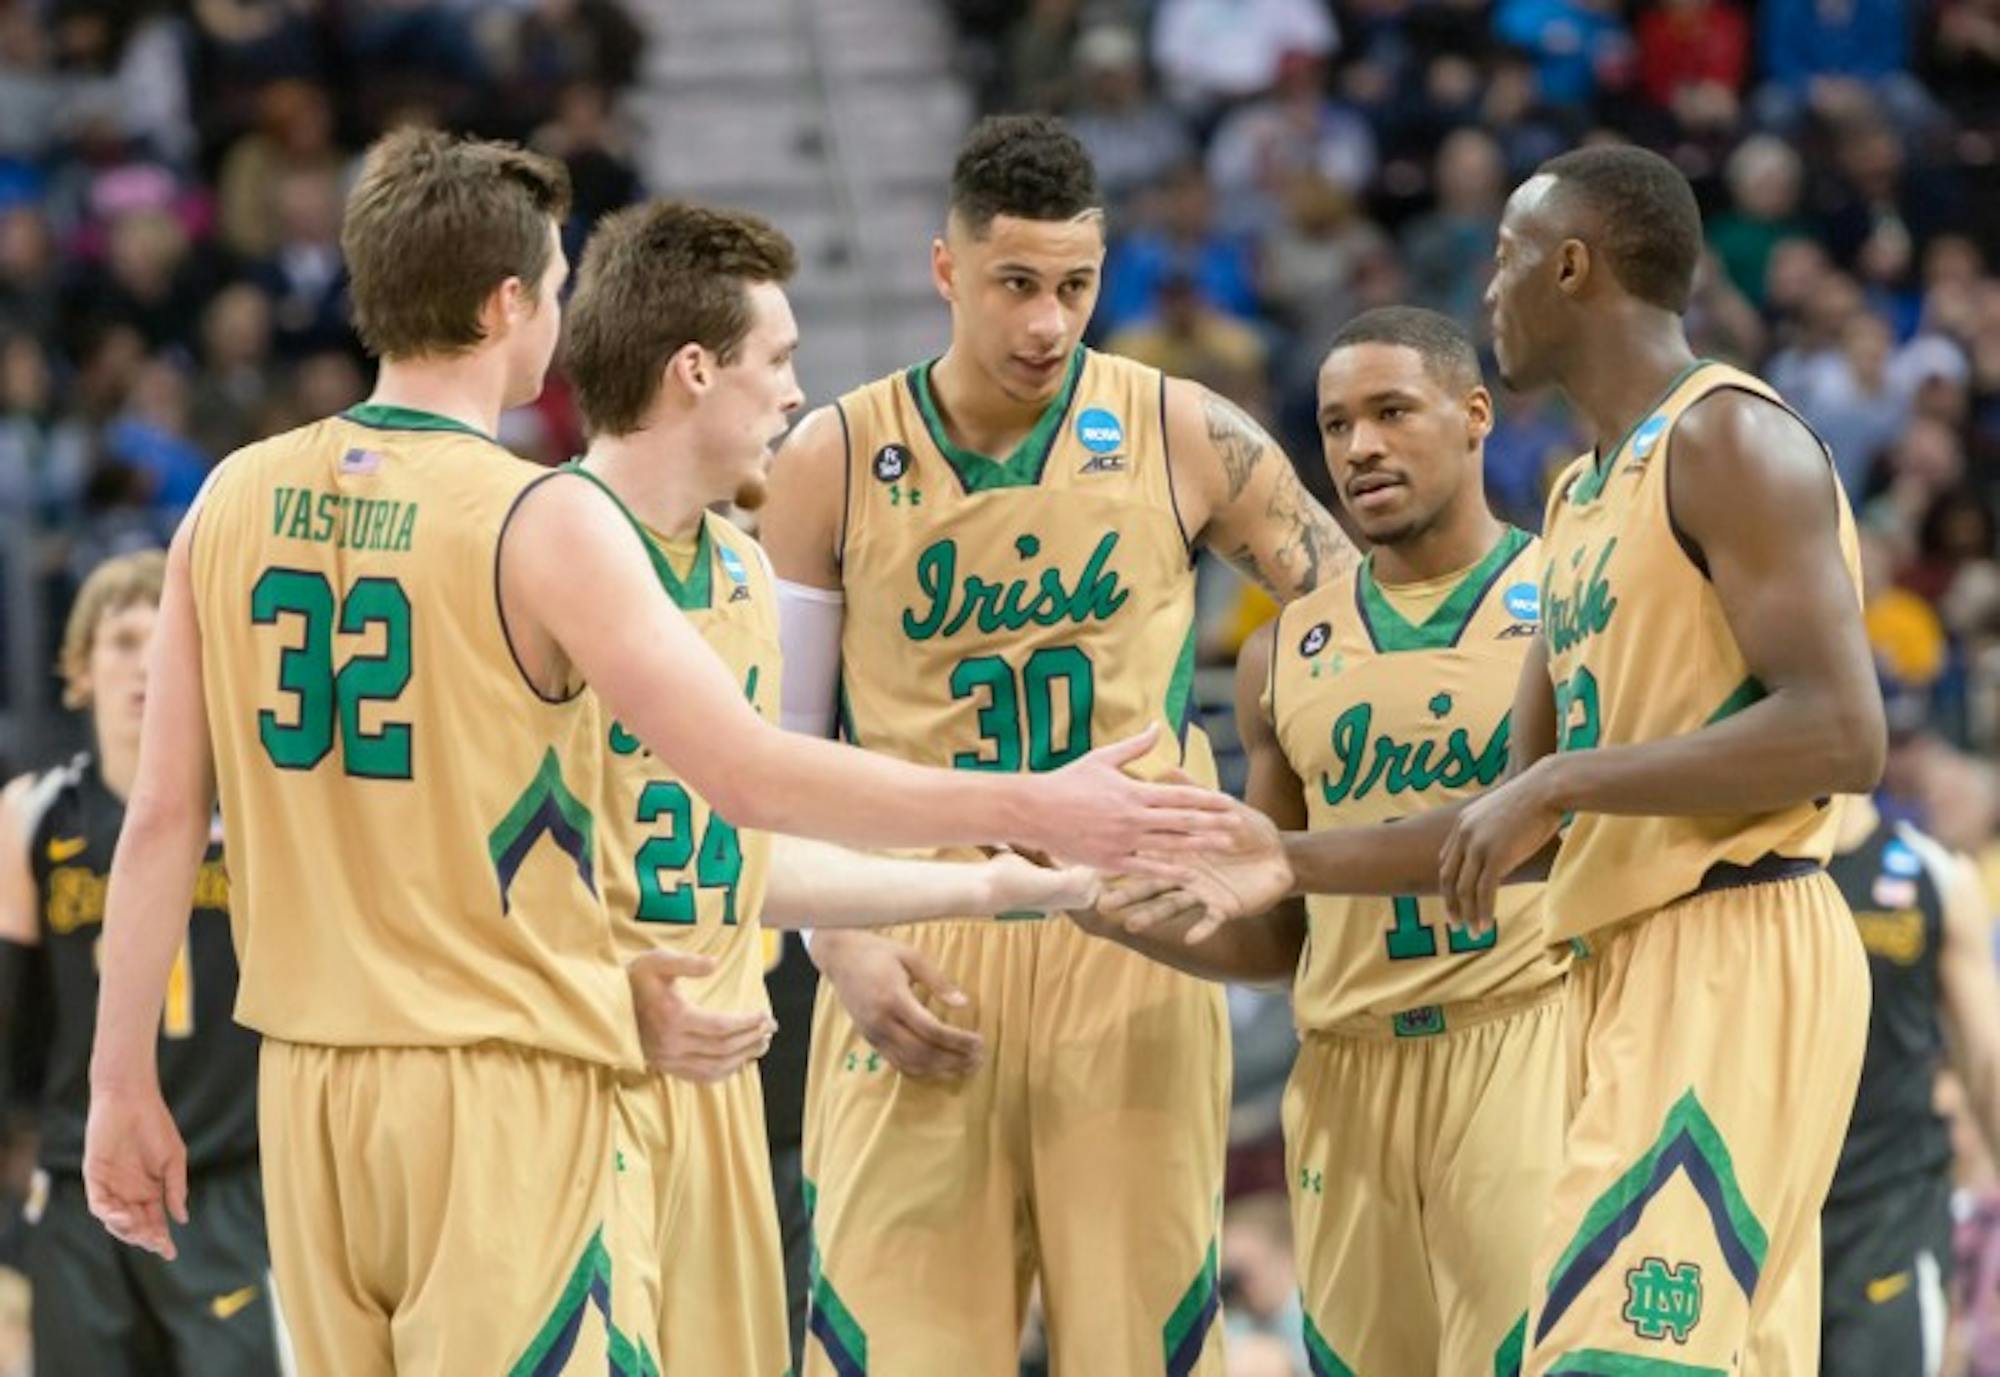 The 2014-2015 men’s basketball team hudles up during an 81-70 victory over Wichita State on March 26 in Cleveland, OH. The Irish advanced to the Elite Eight with the win.